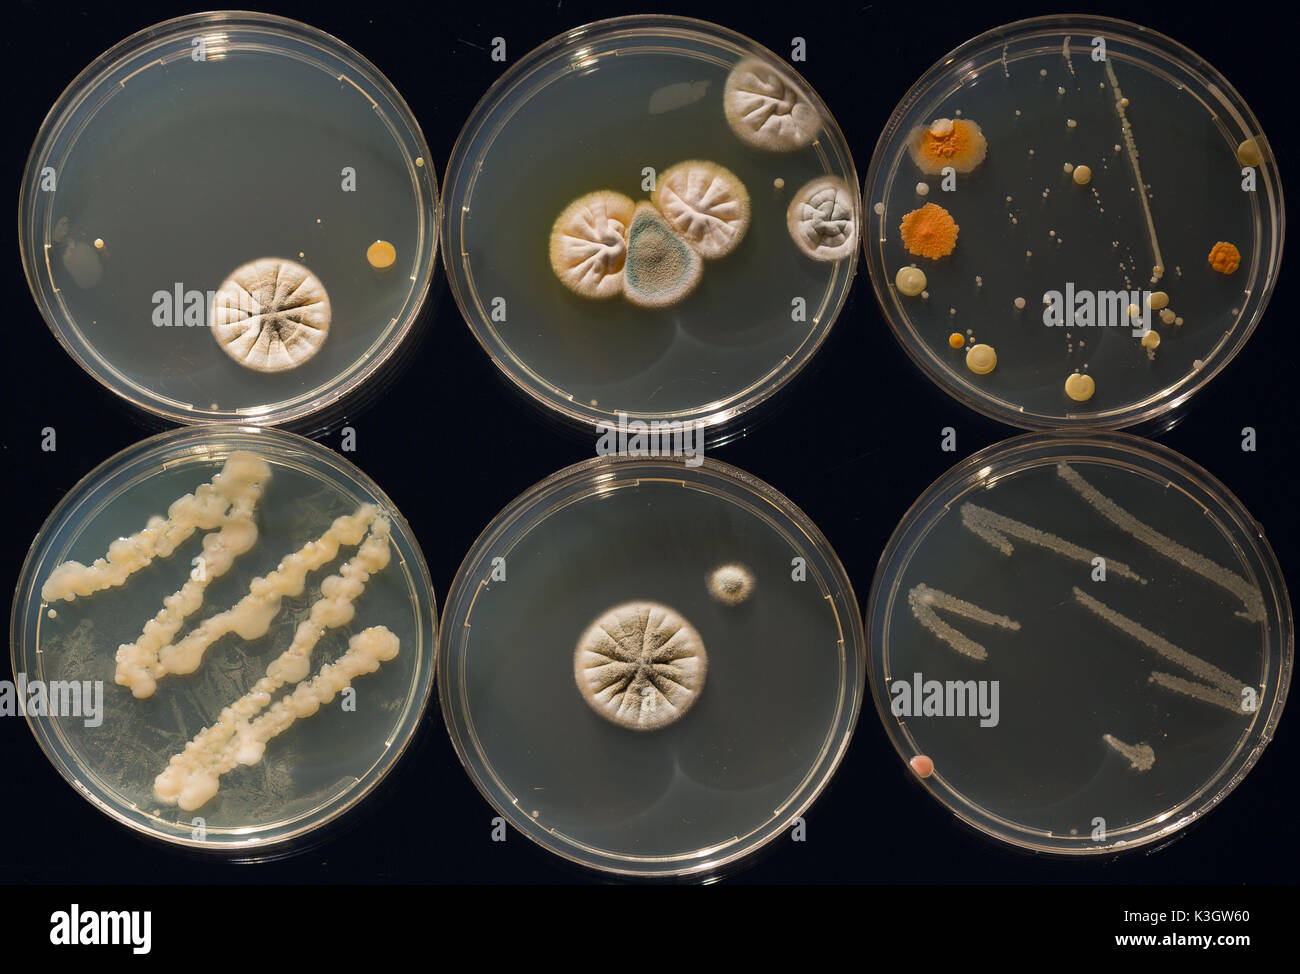 A petri dish with growing cultures of microorganisms, fungi and microbes. A Petri dish  ( Petrie dish) known as a Petri plate or cell-culture dish Stock Photo